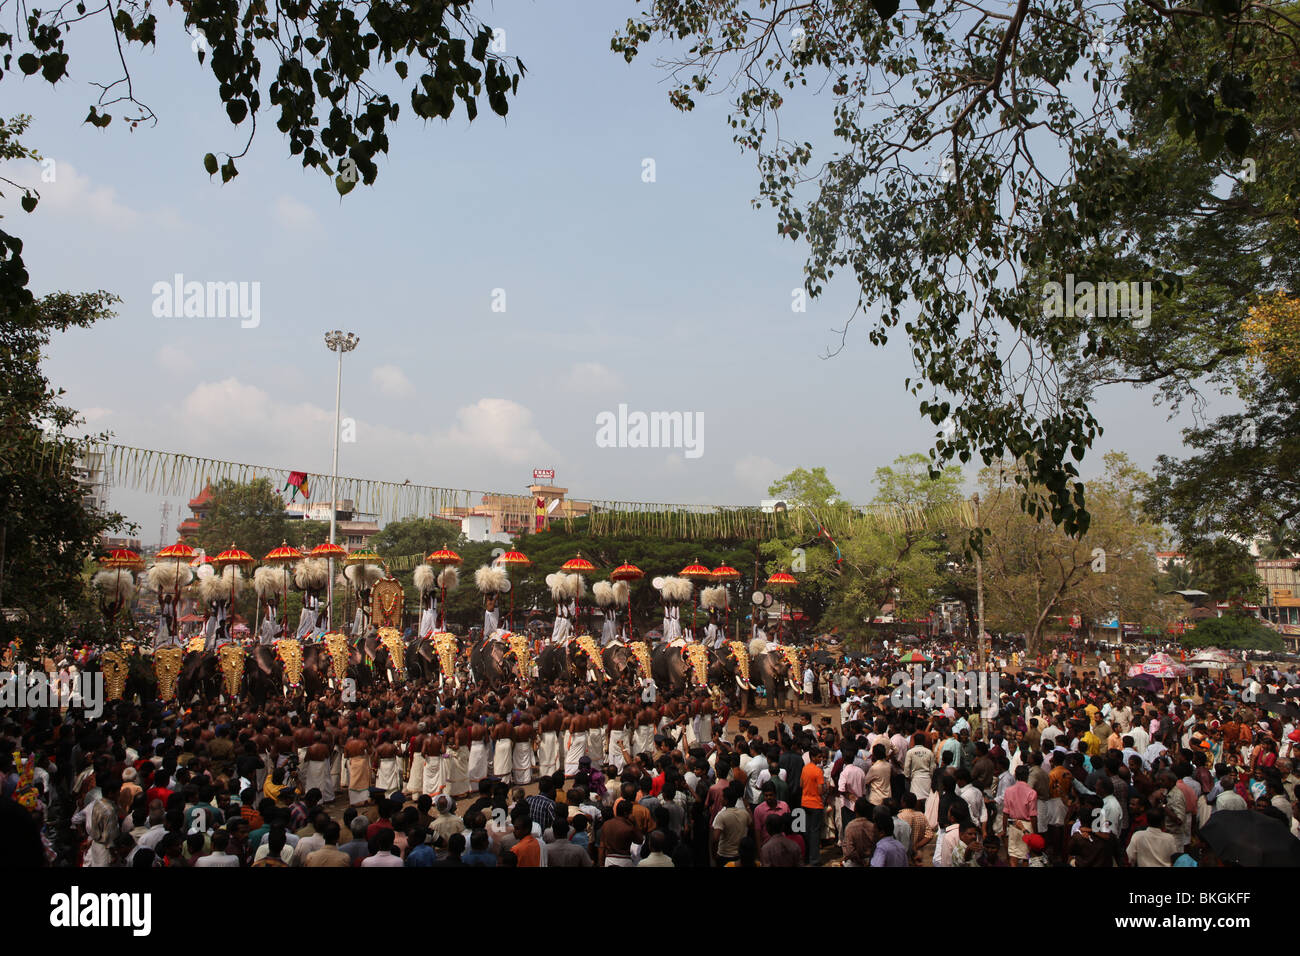 thrissur pooram festival with caparisoned elephants,colored umbrellas.drum play attracting huge crowd Stock Photo